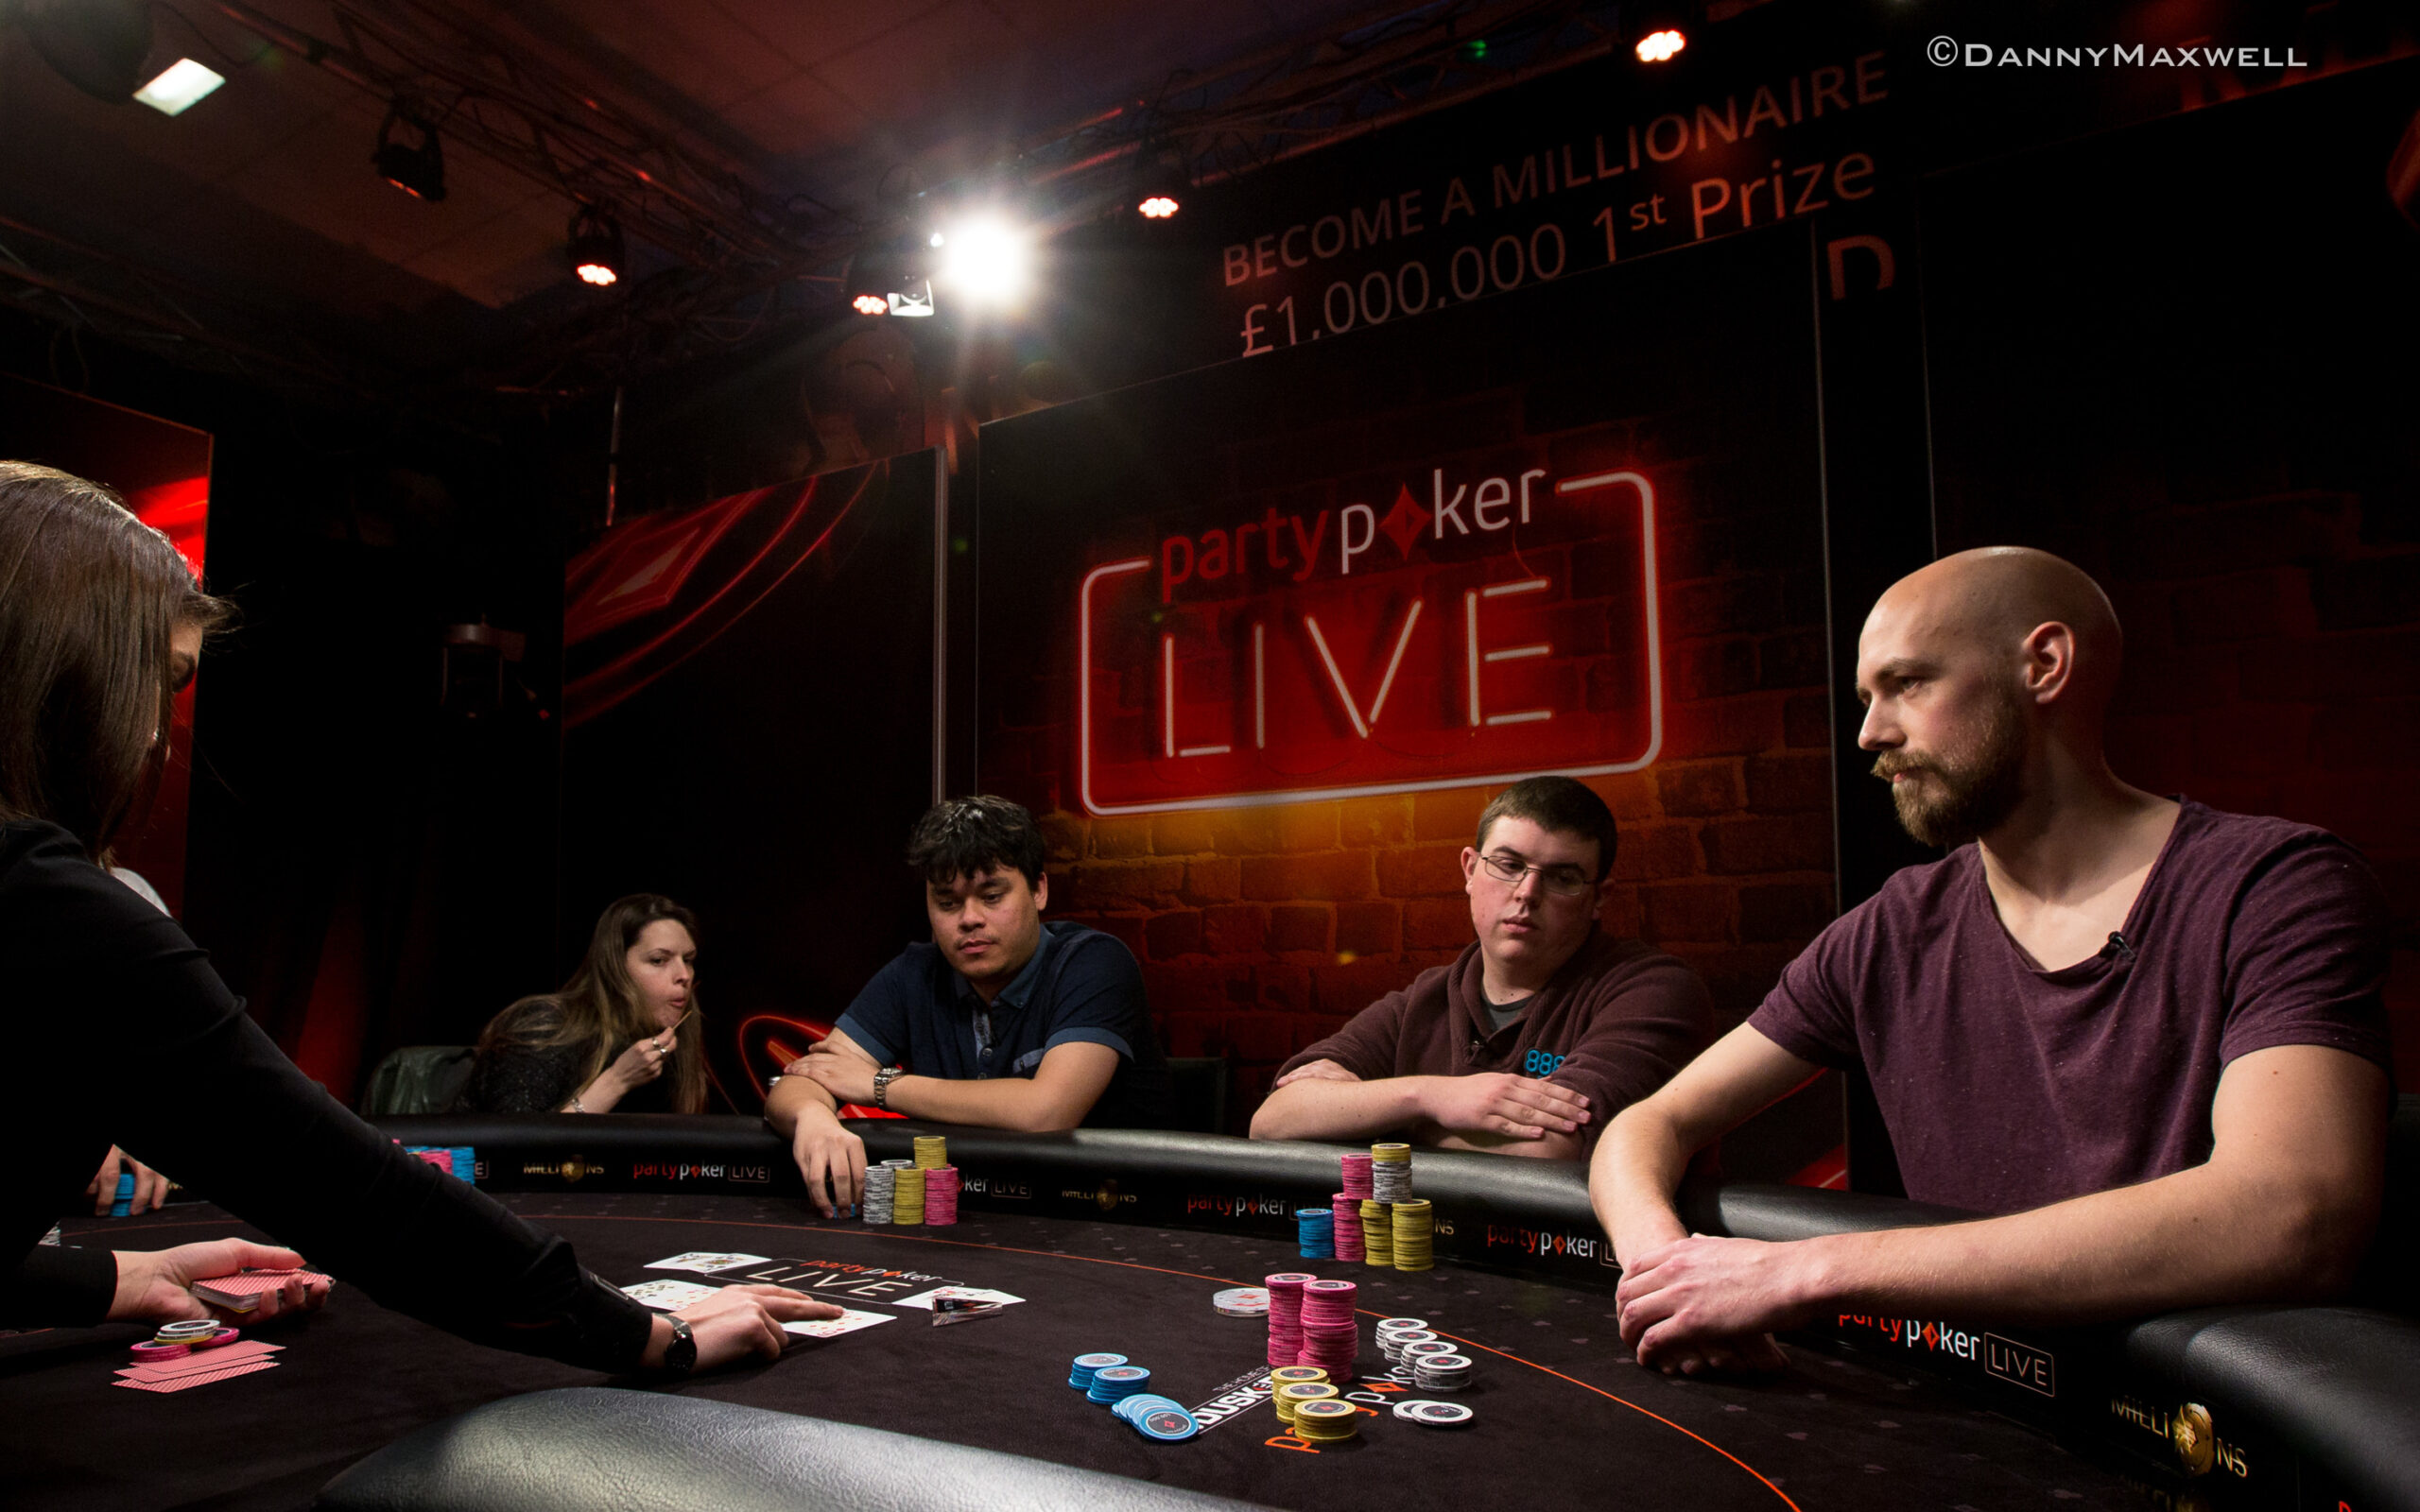 Maria Lampropulos Scoops Partypoker LIVE Millions for Historic Win, CardsChat Forum Member Jeremy Pantin Takes Third